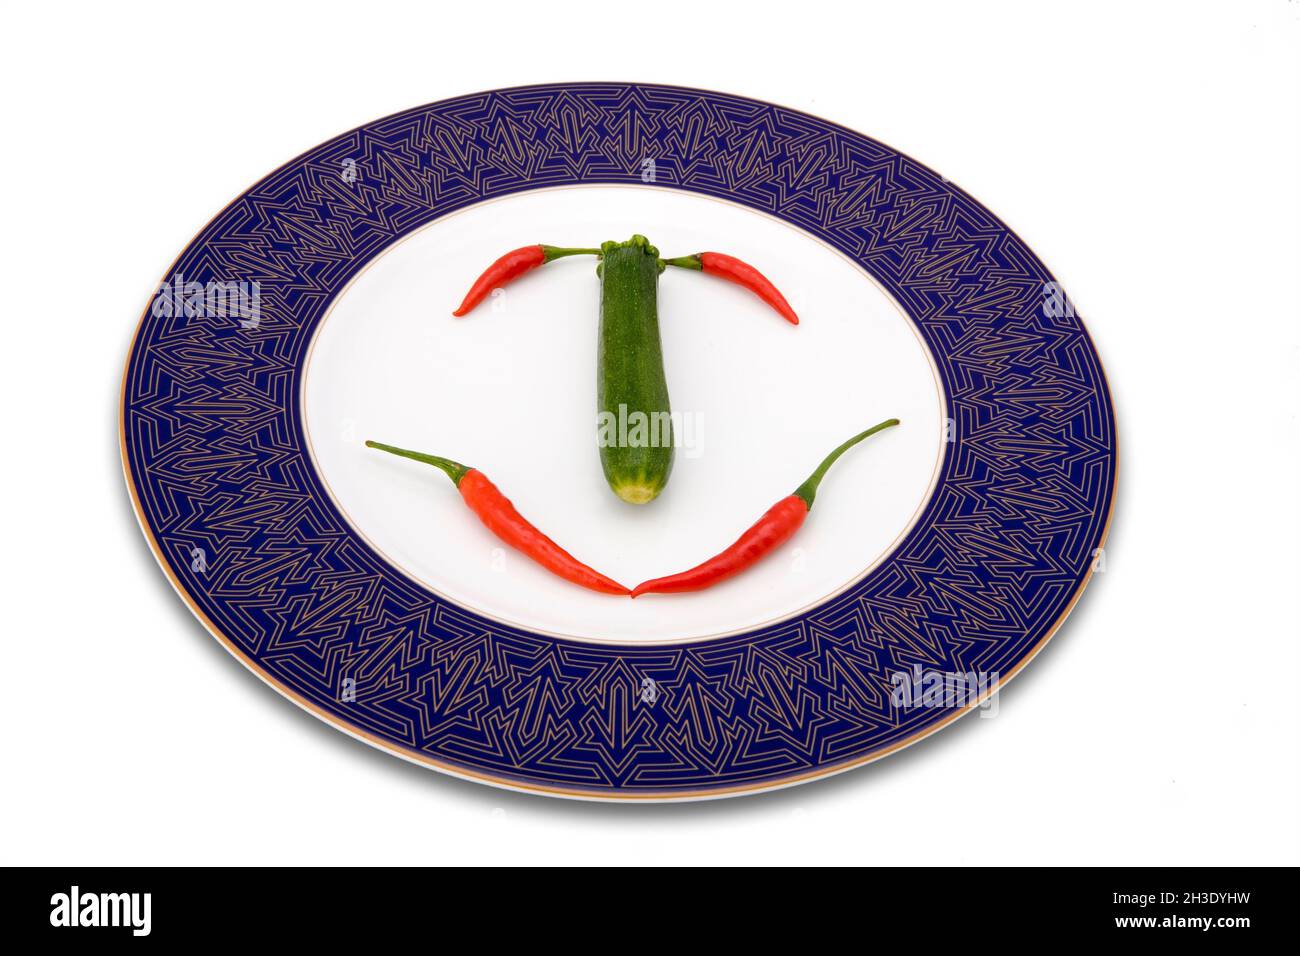 courgette, zucchini (Cucurbita pepo var. giromontiia, Cucurbita pepo subsp. pepo convar. giromontiina), and chilies arranged to a face on a plate Stock Photo